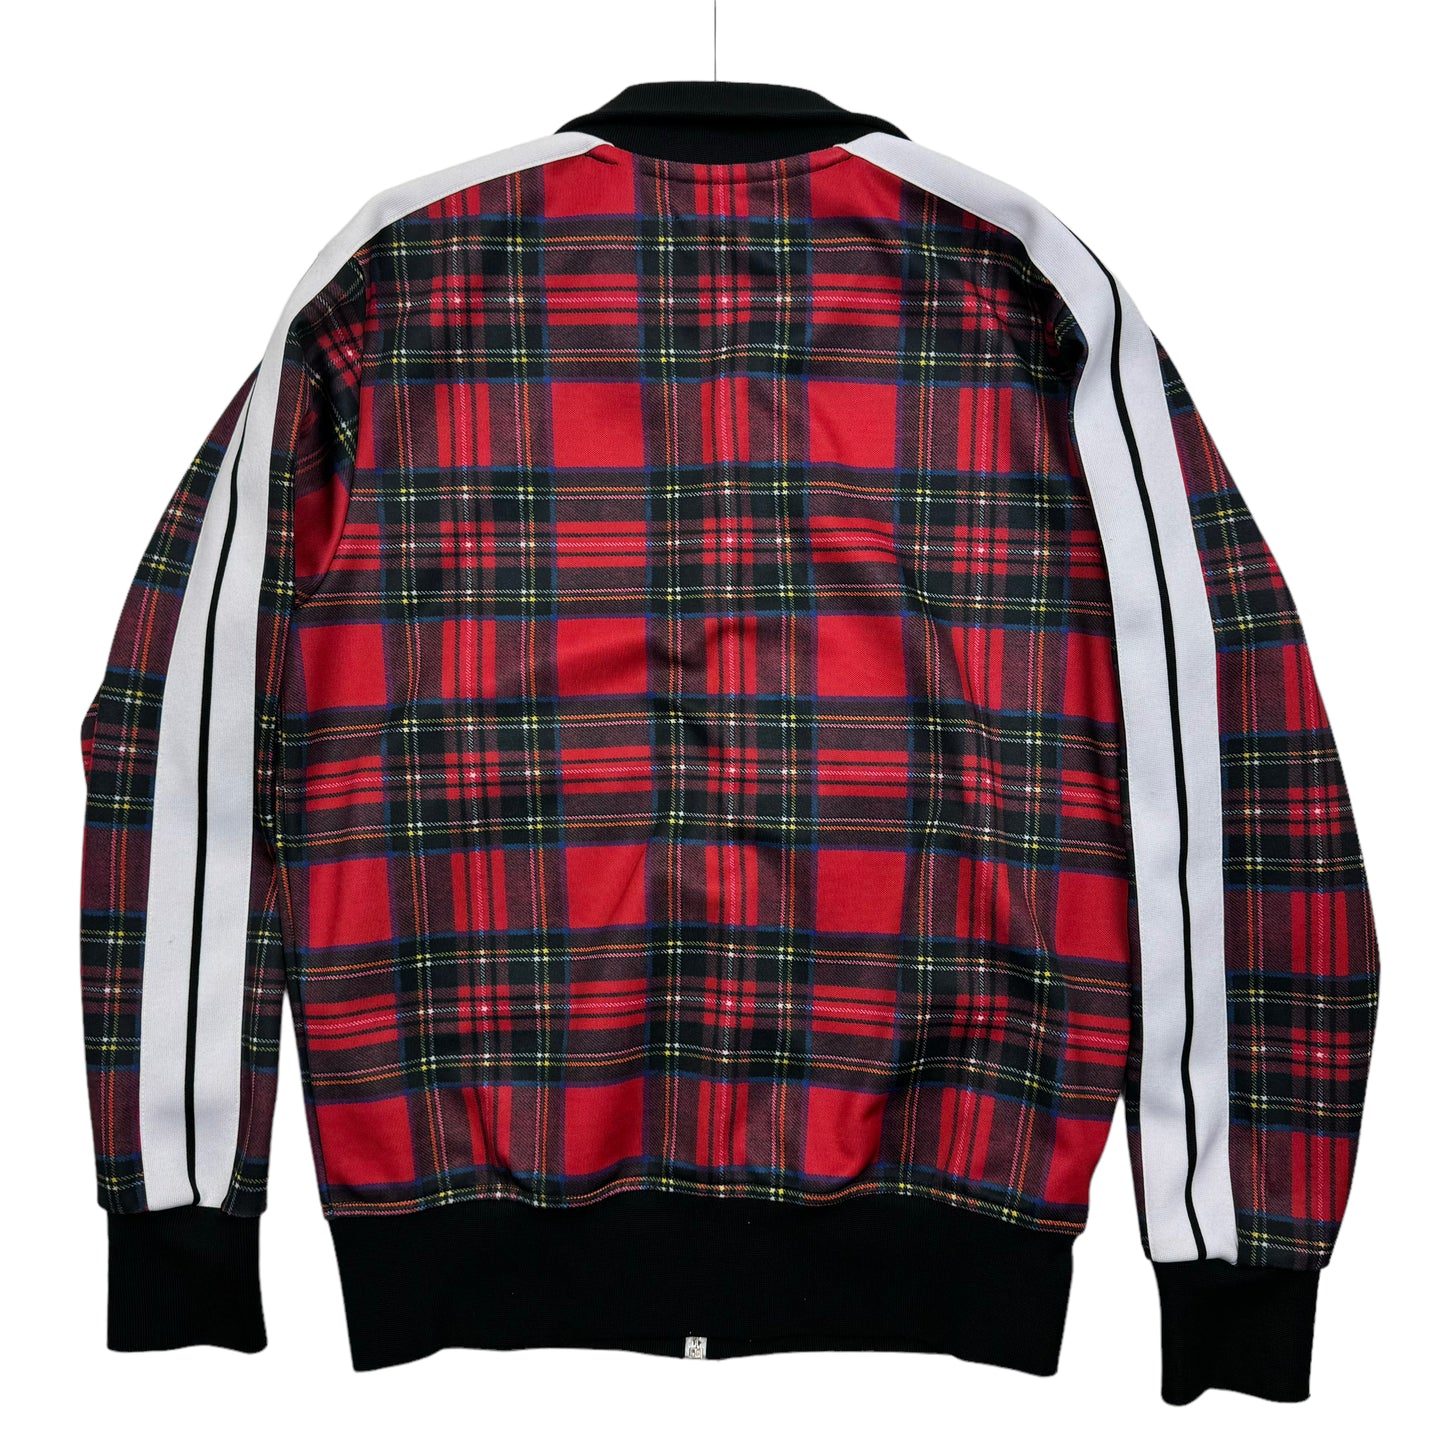 Palm Angels Checked Track Jacket